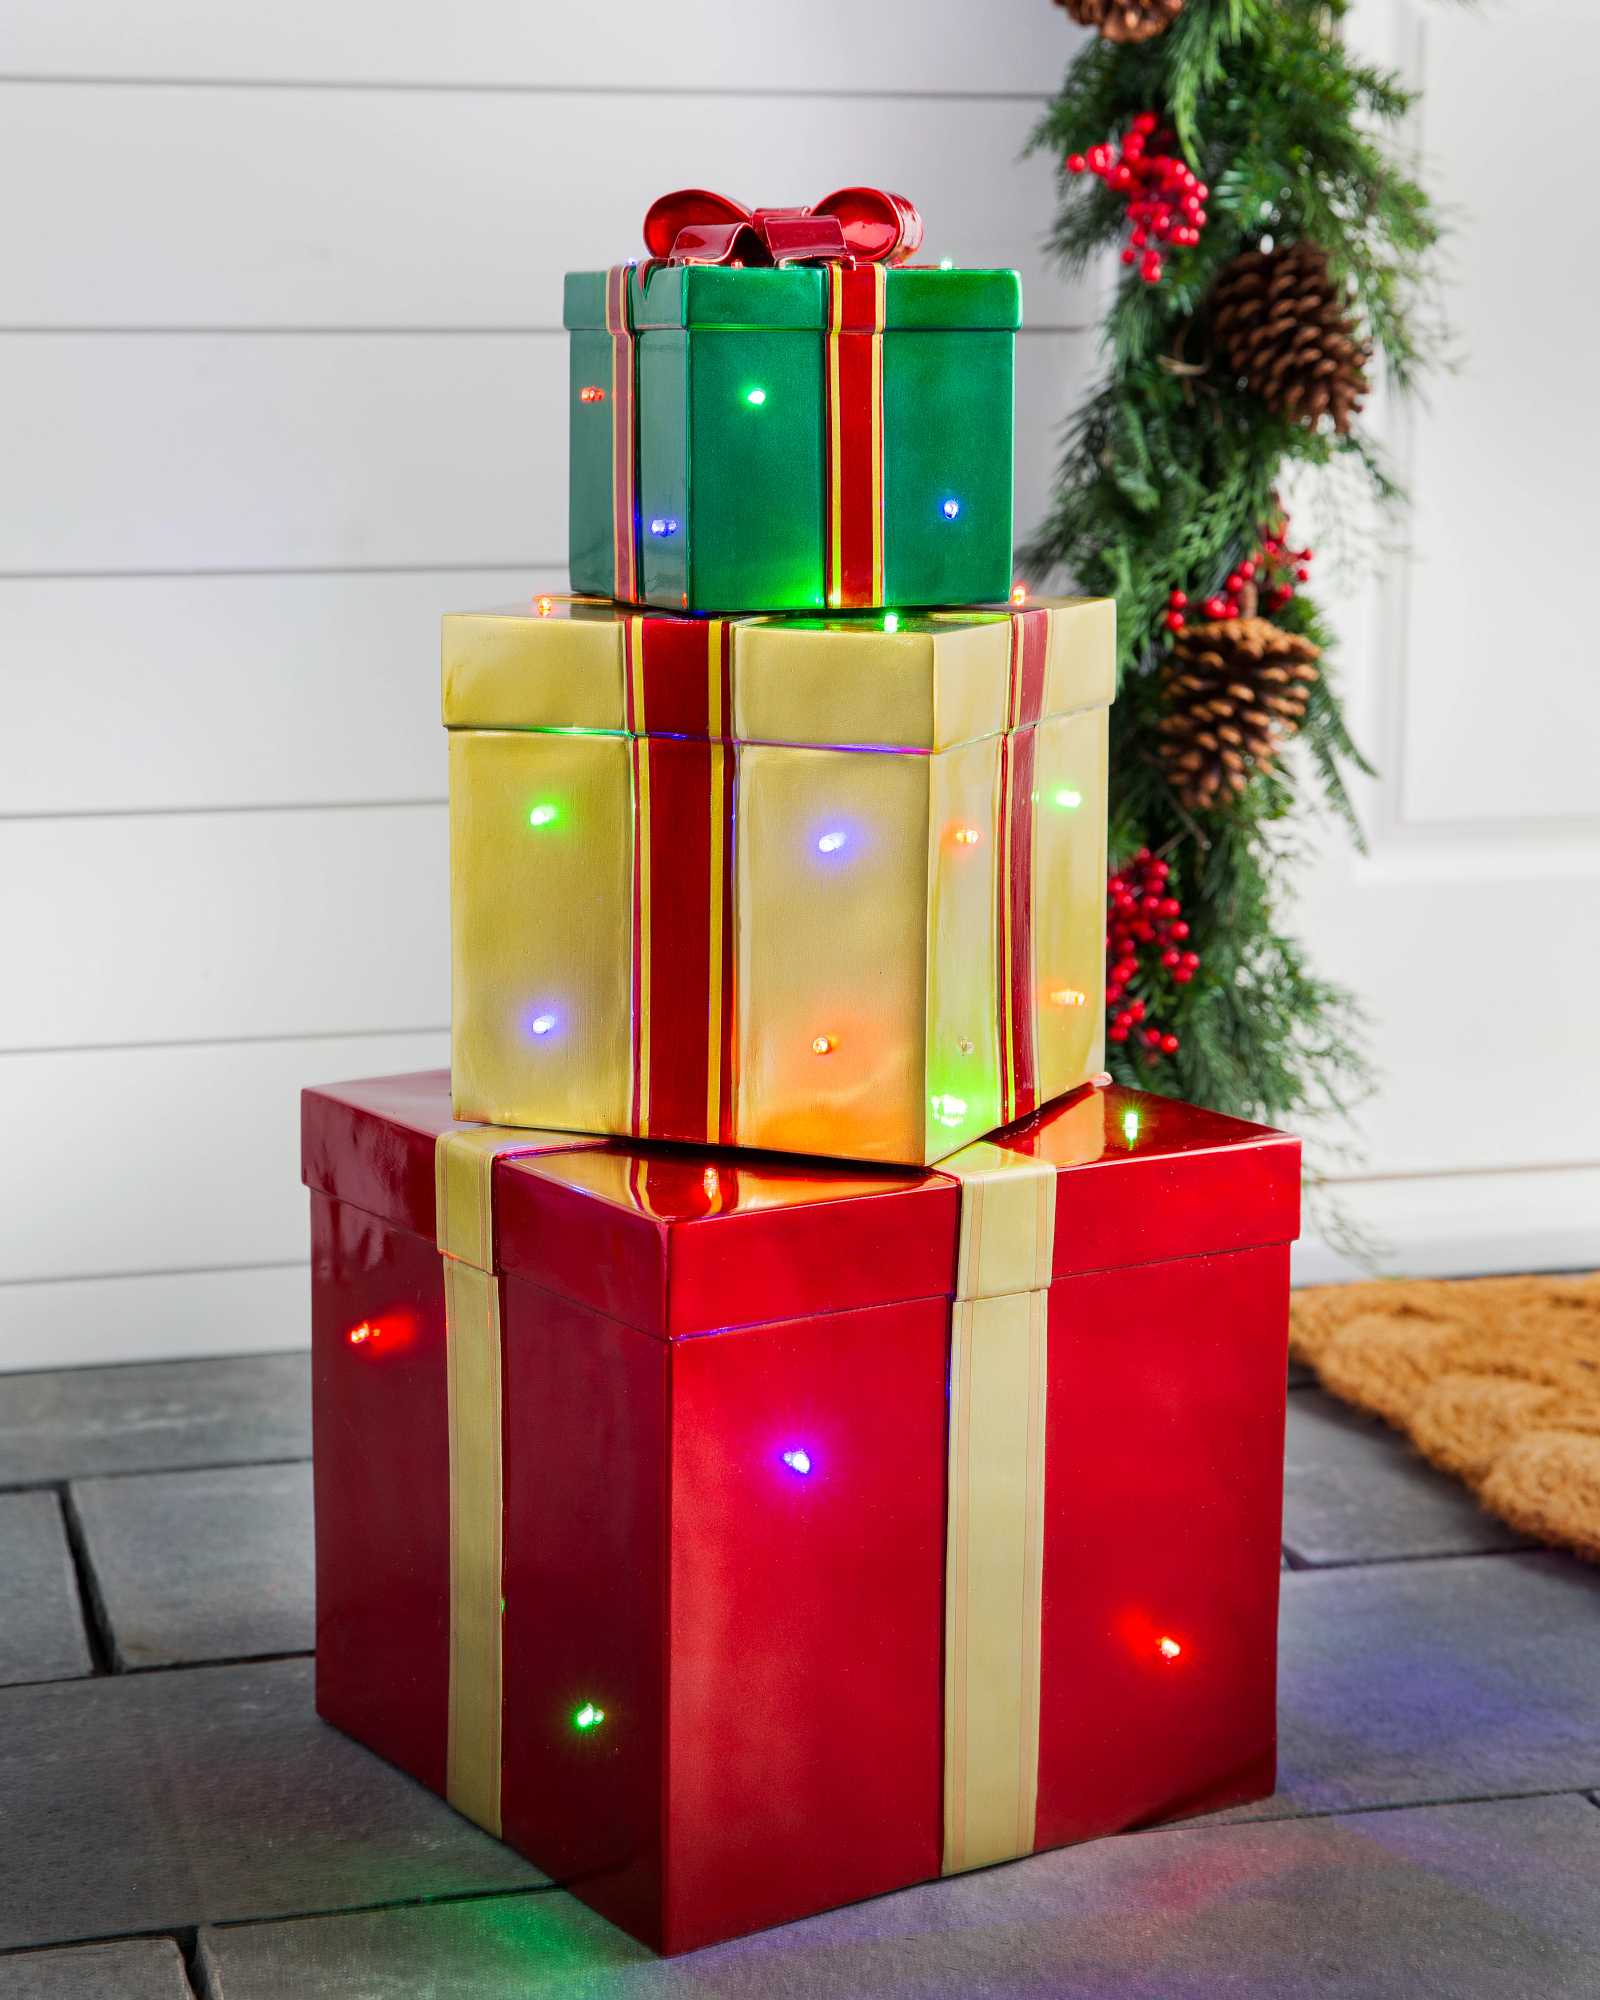 https://source.widen.net/content/sxxg6udl06/jpeg/OUT-2041000_Outdoor-Stackable-Lighted-Christmas-Gifts_SSC.jpeg?w=1600&h=2000&keep=c&crop=yes&color=cccccc&quality=100&u=7mzq6p